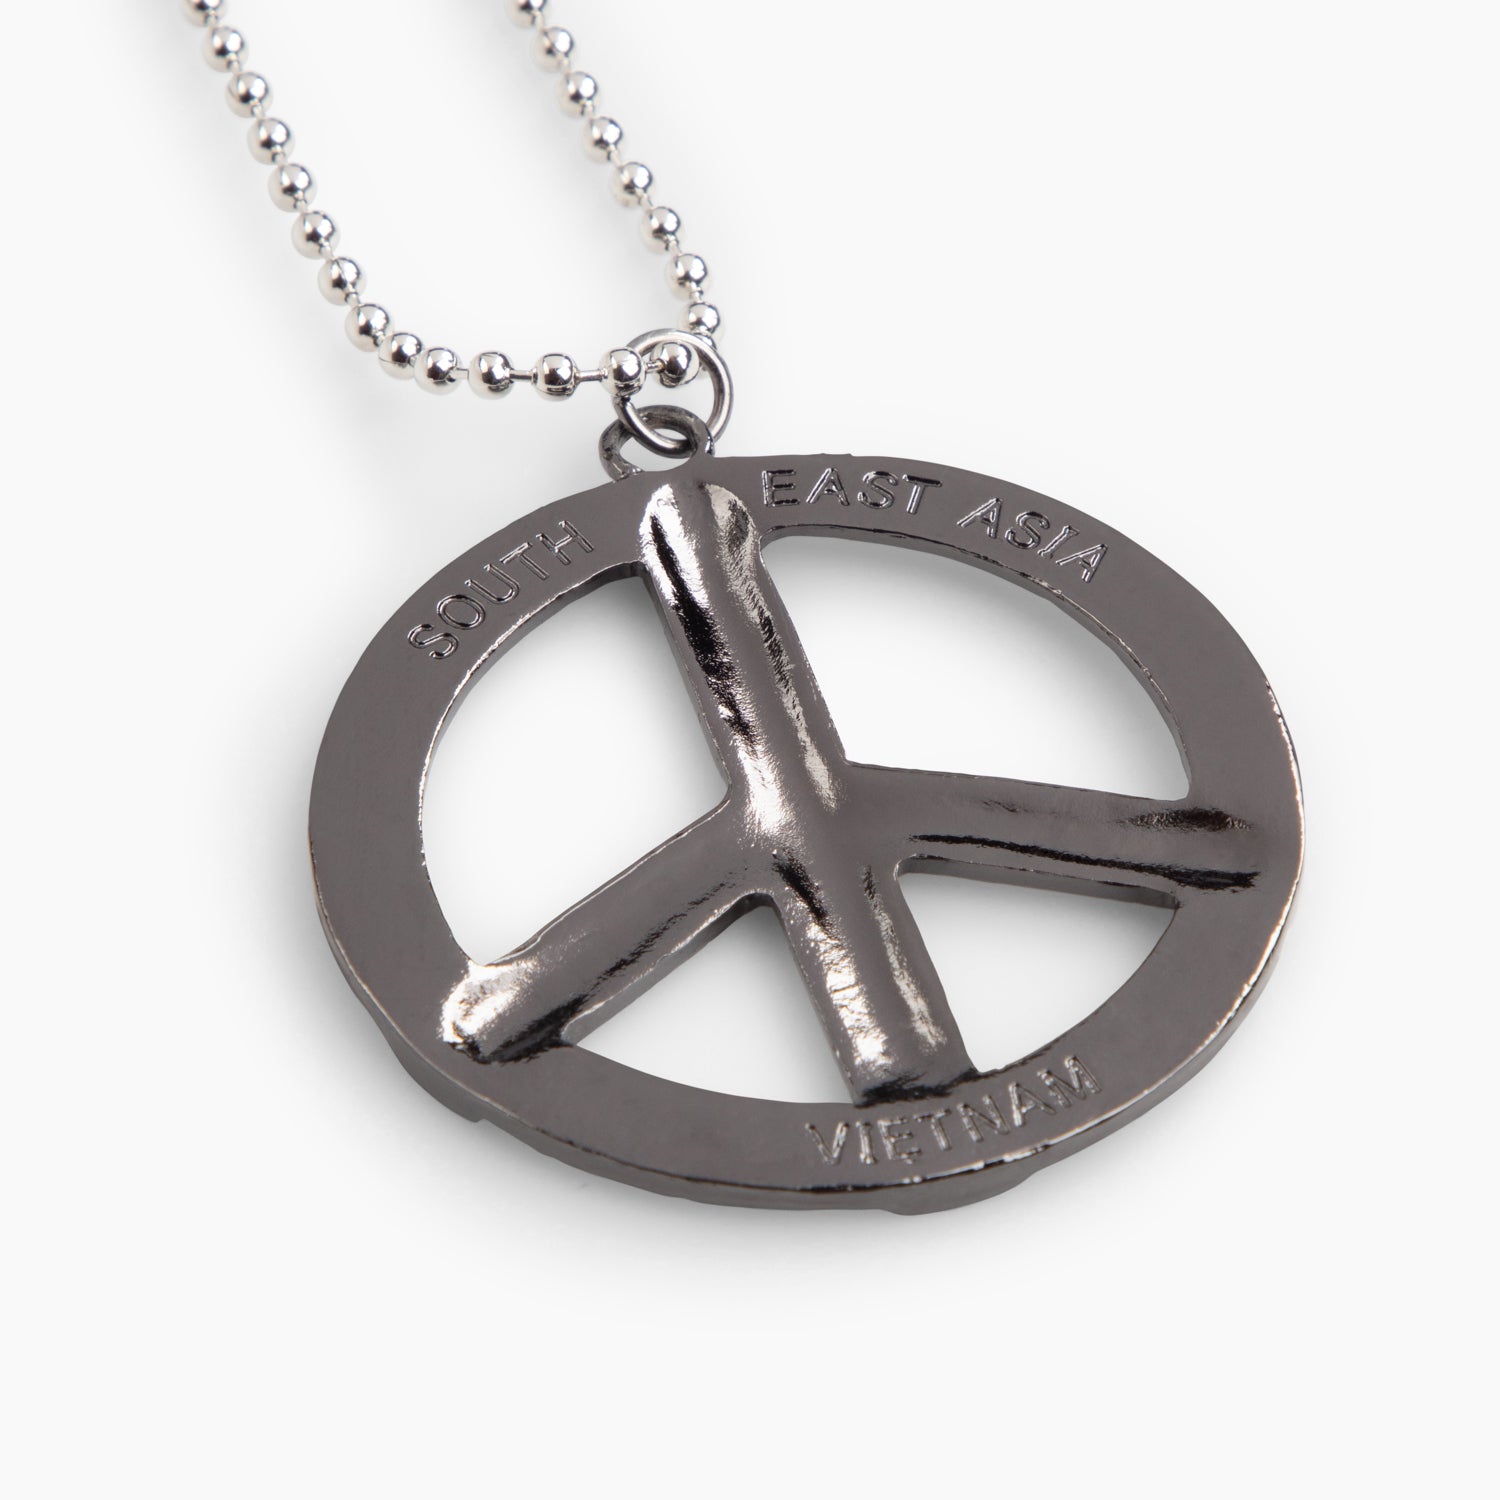 TSPTR x EAST ASIA Peace Necklace